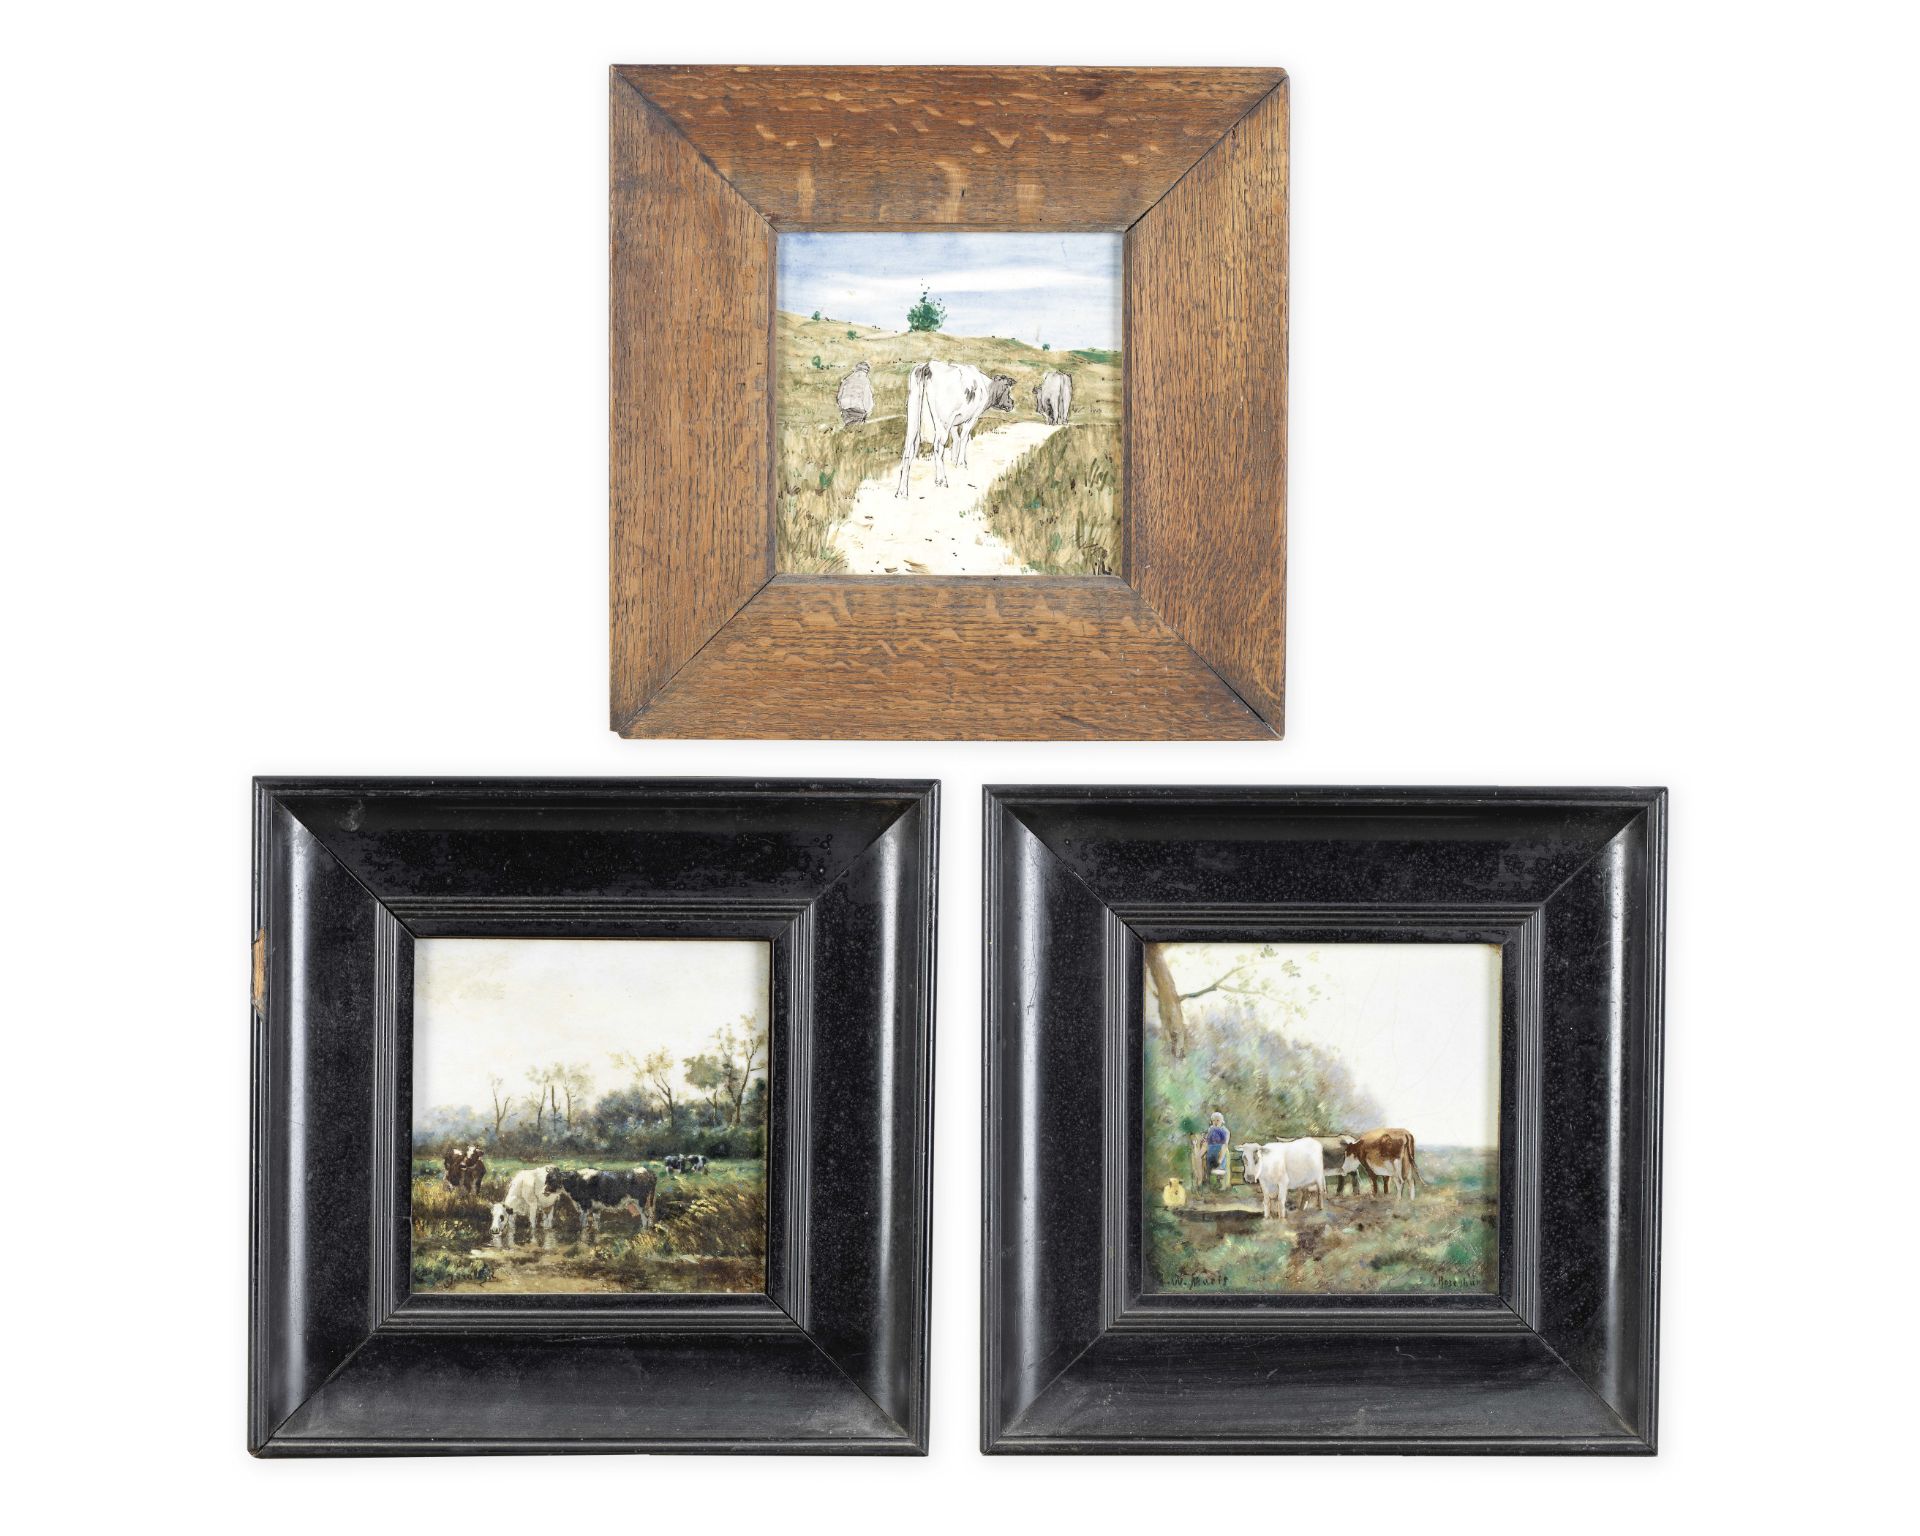 Rozenburg Three picture tiles depicting rural scenes with cows, late 19th/early 20th Century